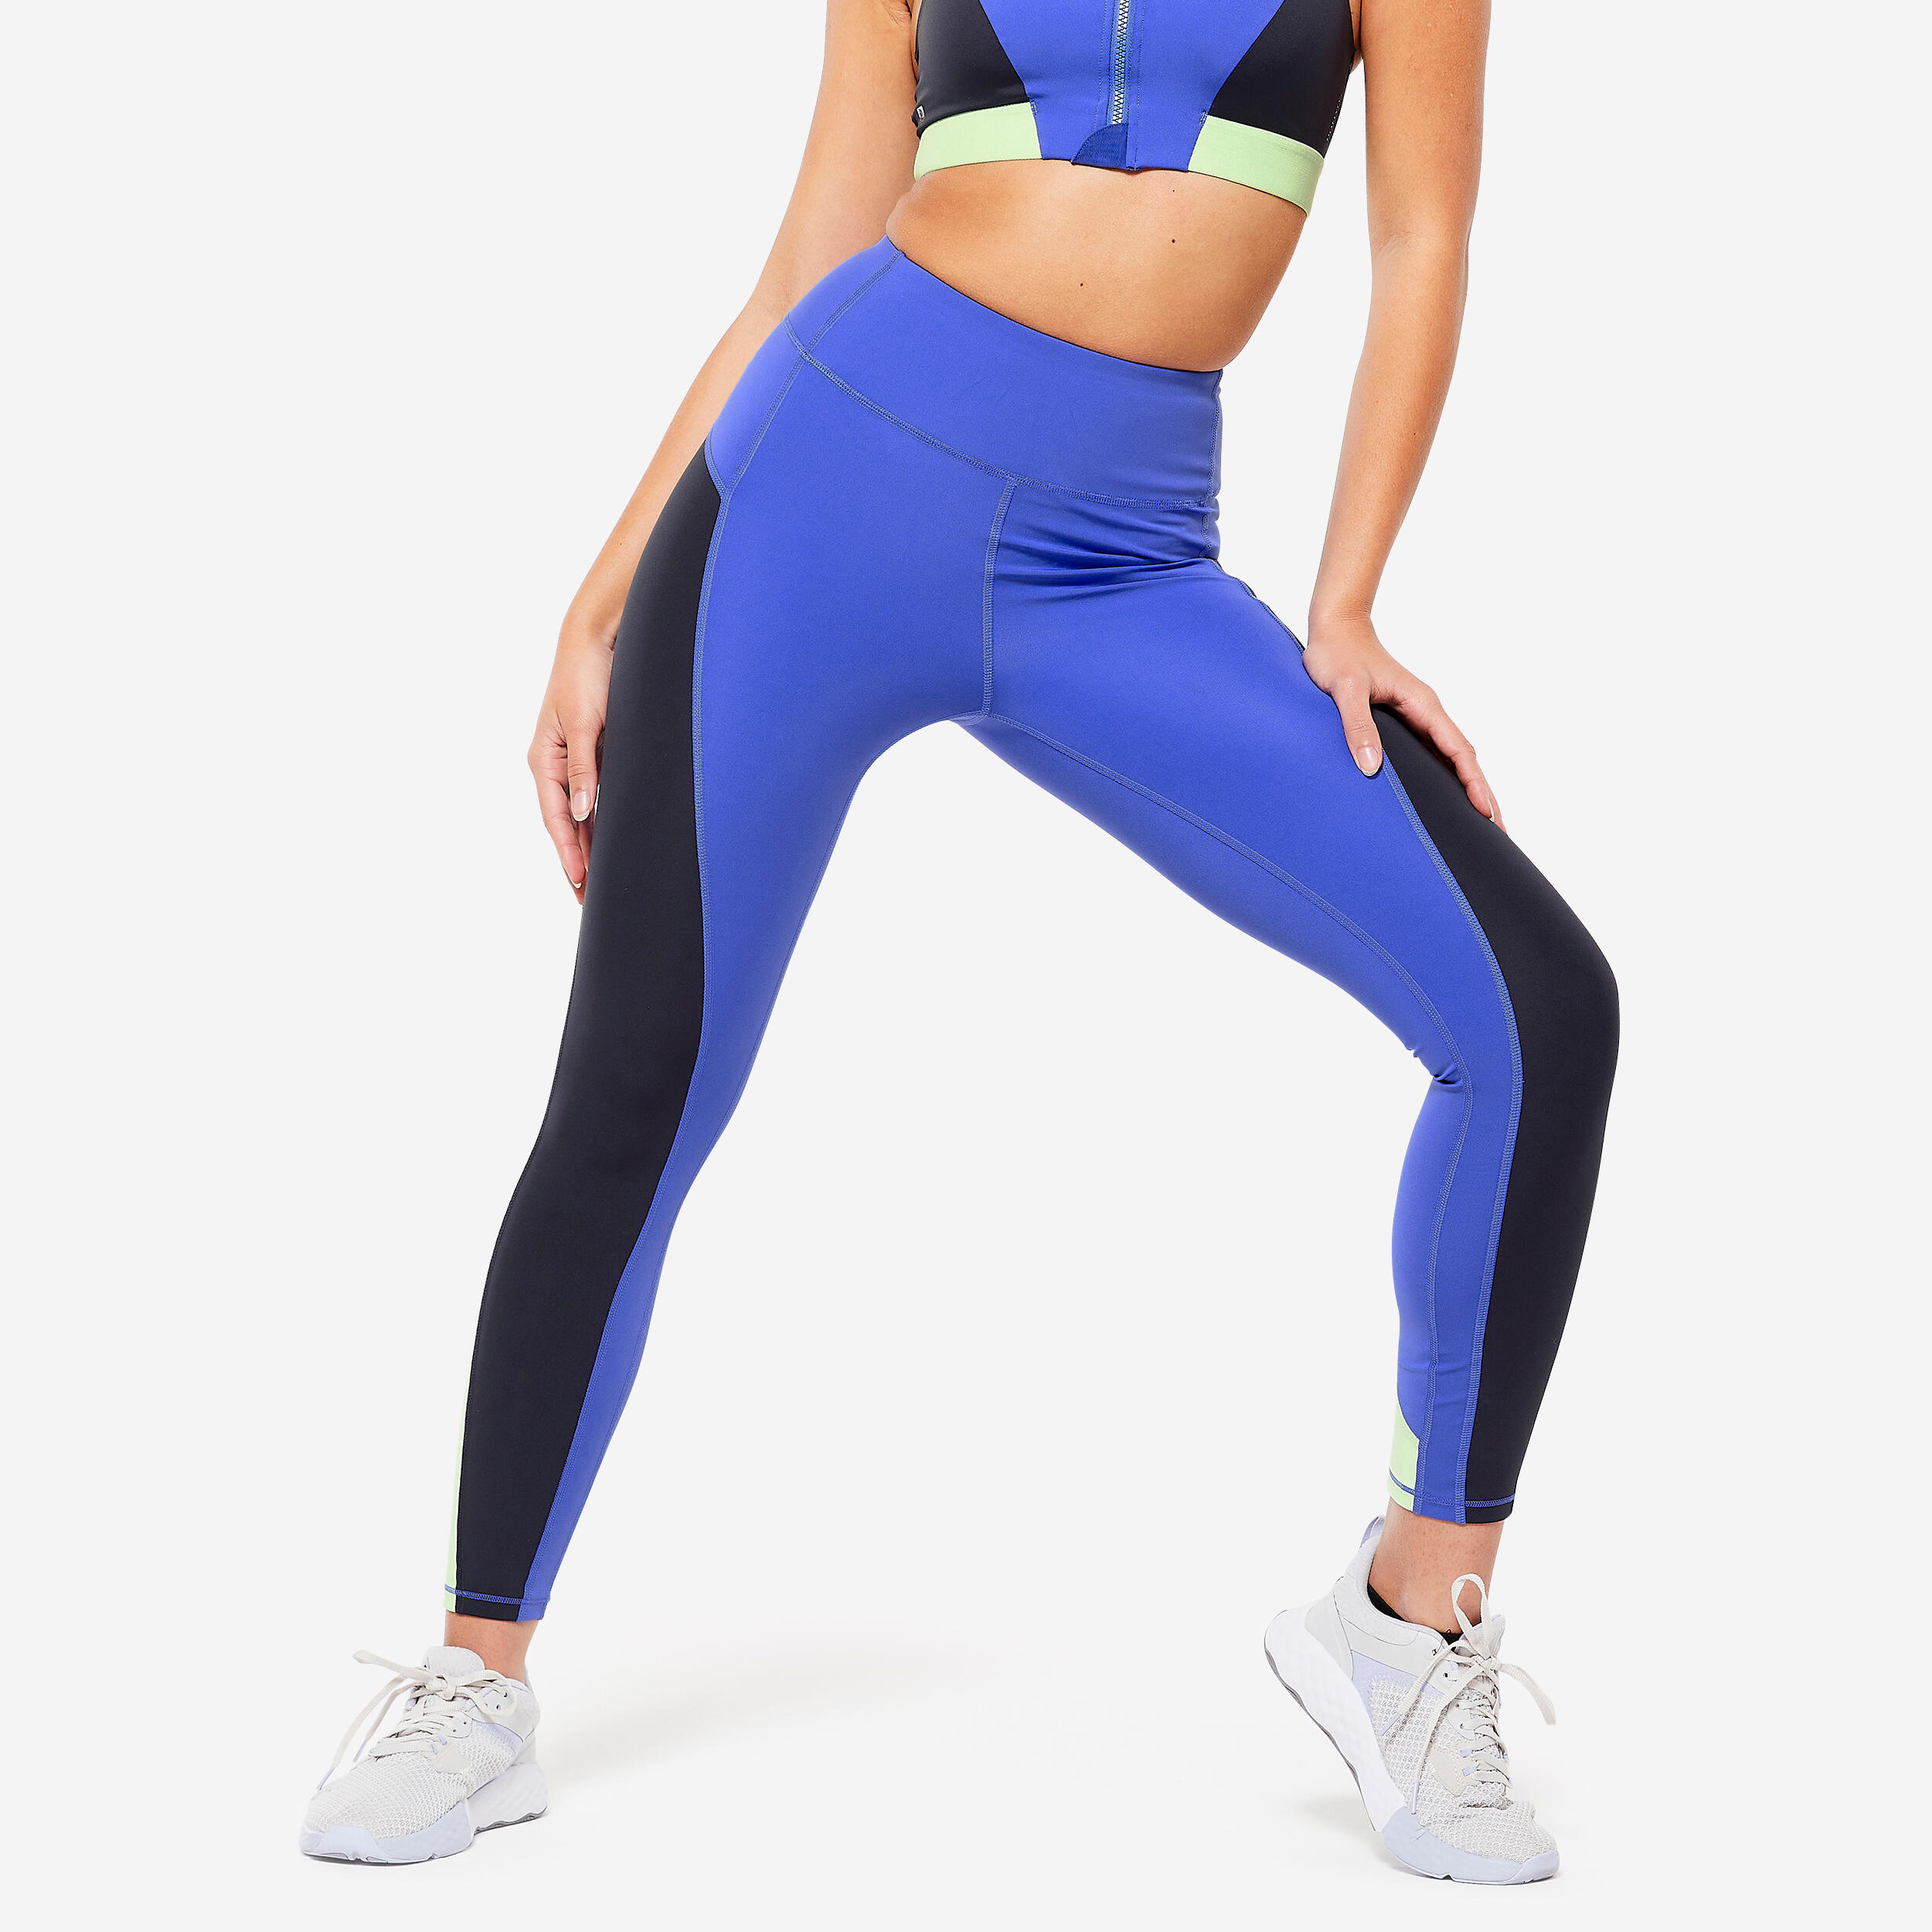 Gym Leggings Manufacturers, Suppliers, Dealers & Prices